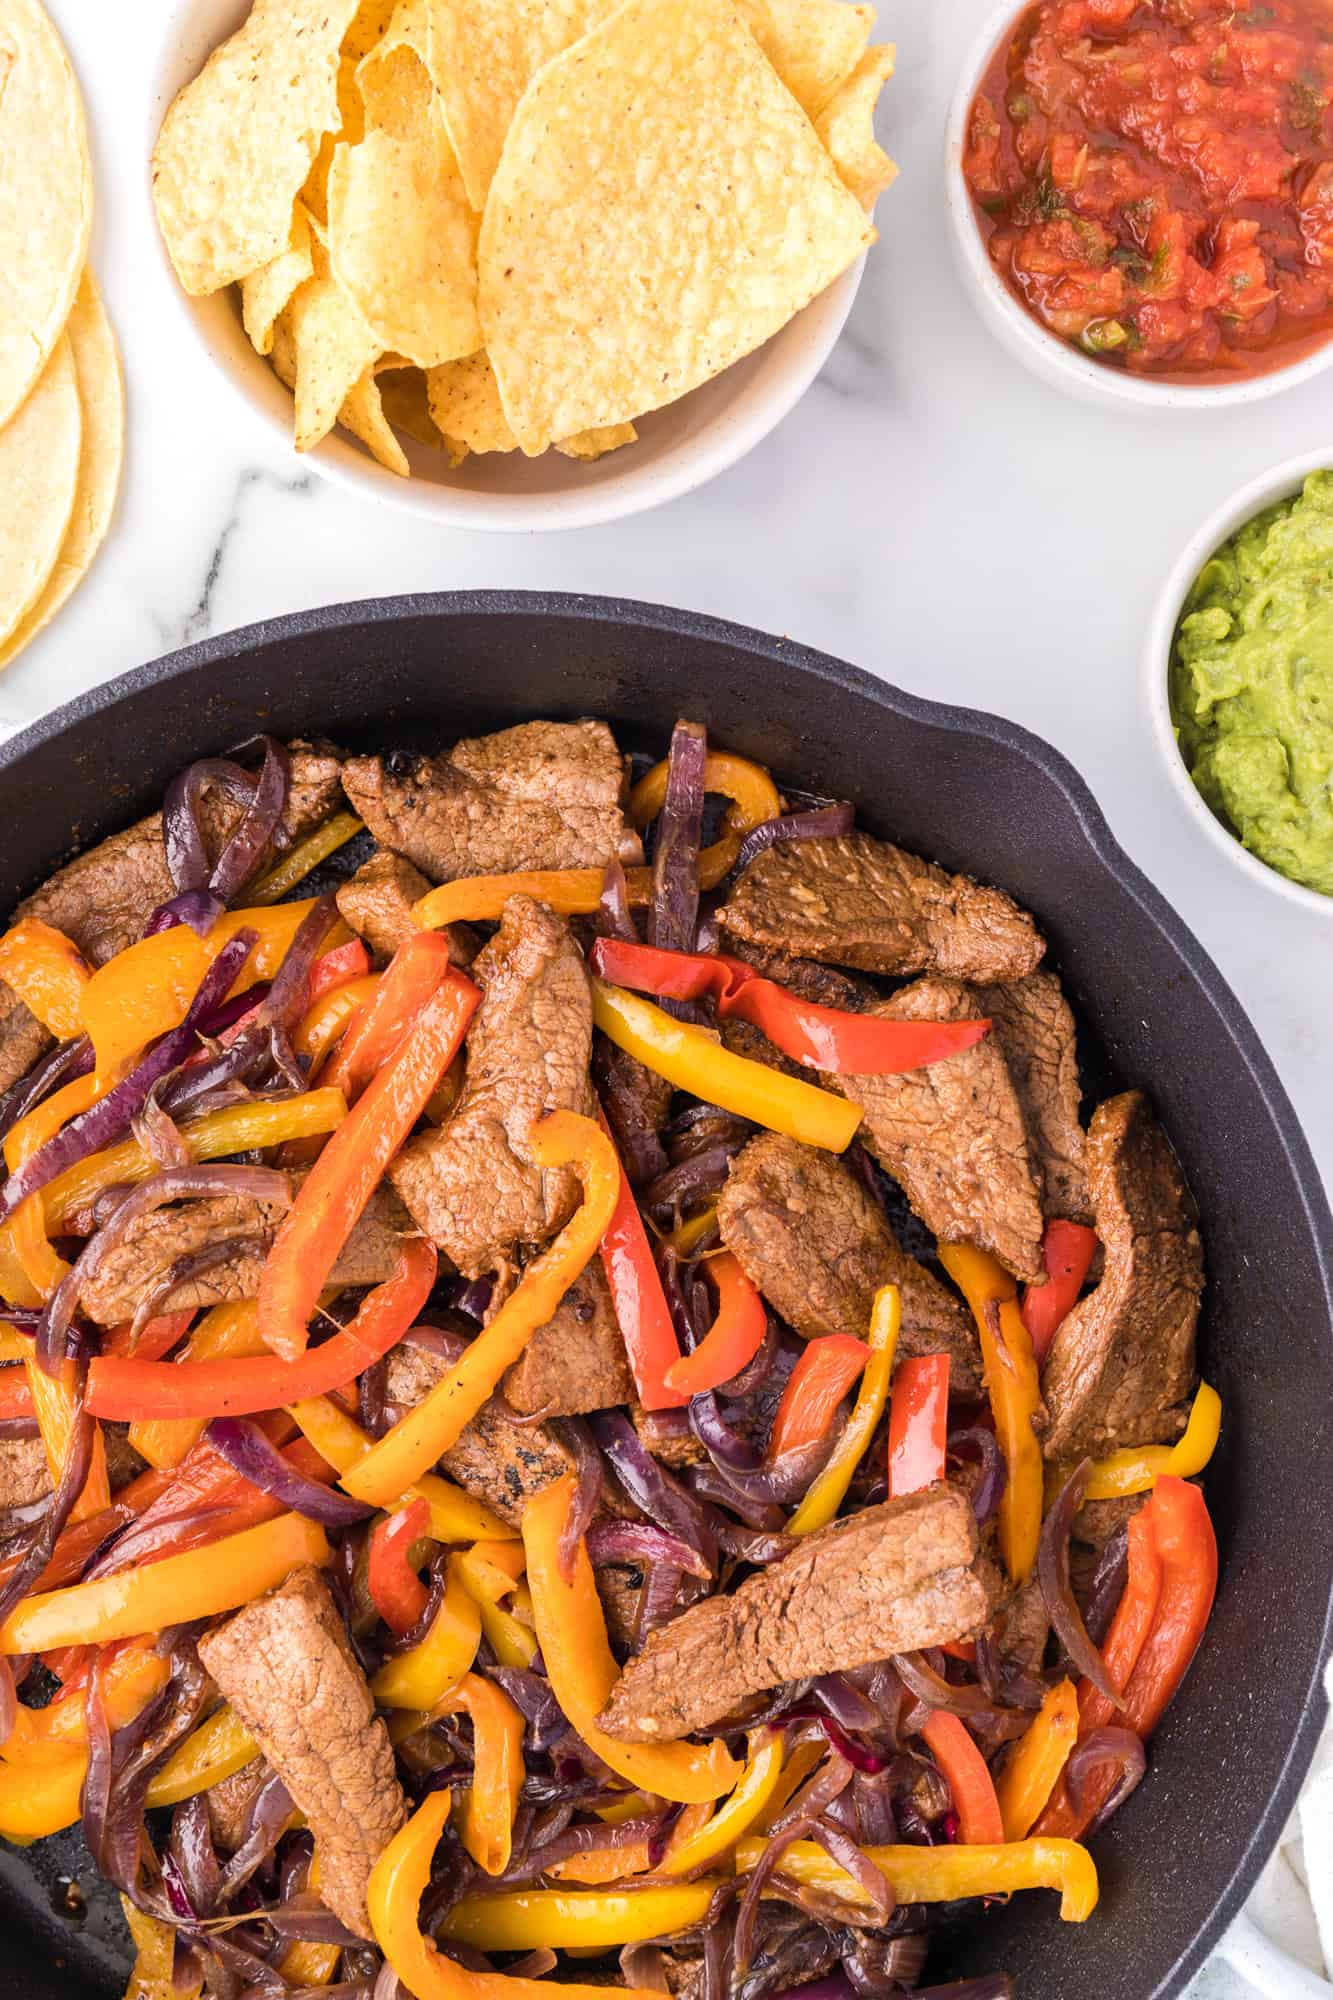 Overhead view of steak fajitas in a skillet, next to bowls of tortilla chips, salsa, and guacamole.